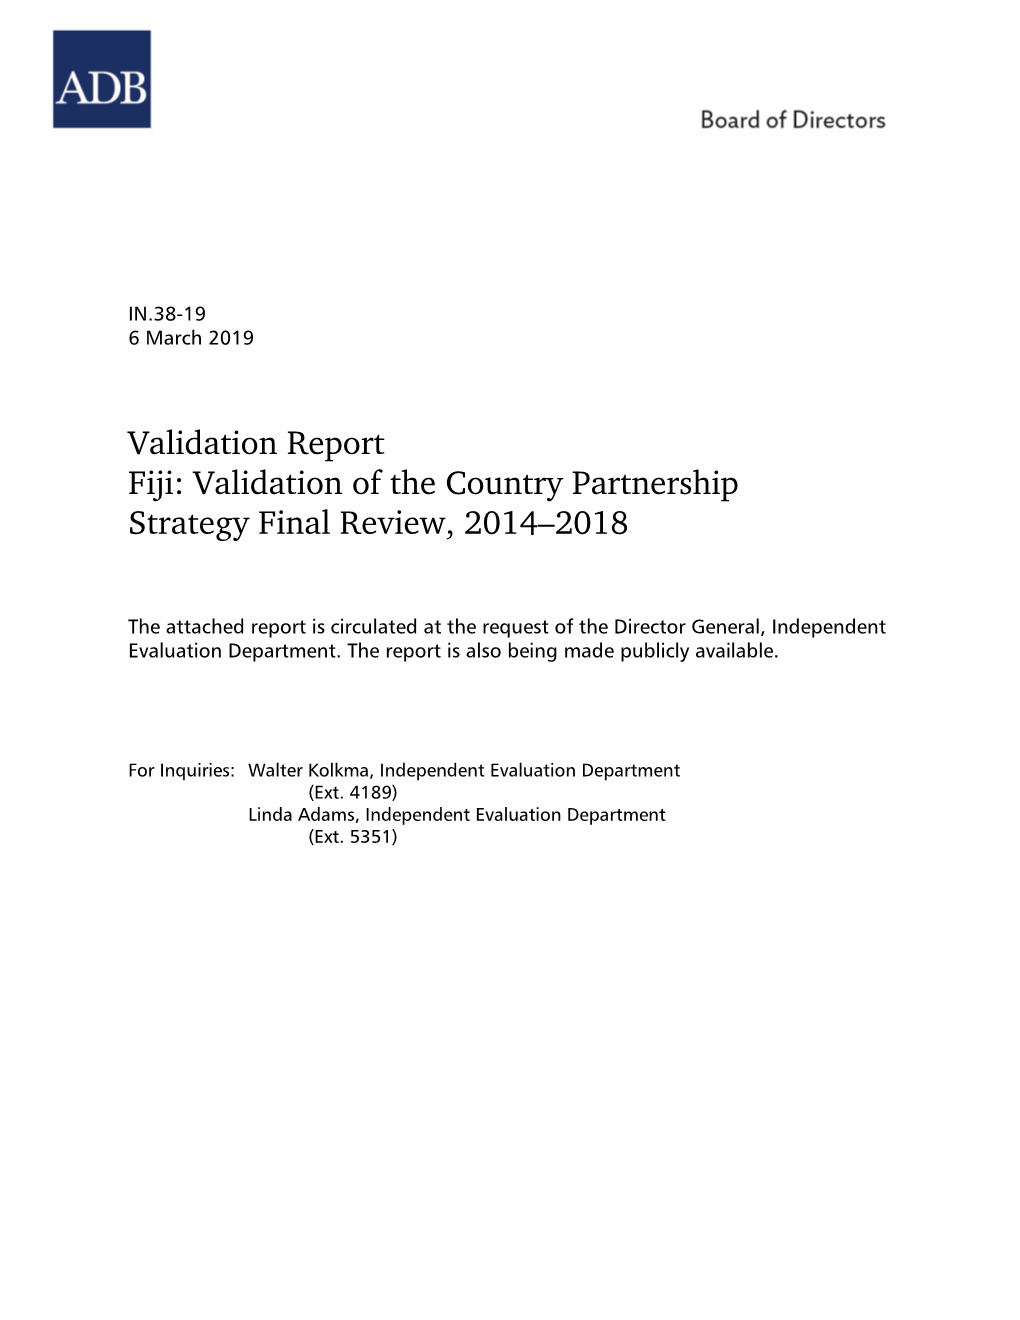 Fiji: Validation of the Country Partnership Strategy Final Review, 2014–2018